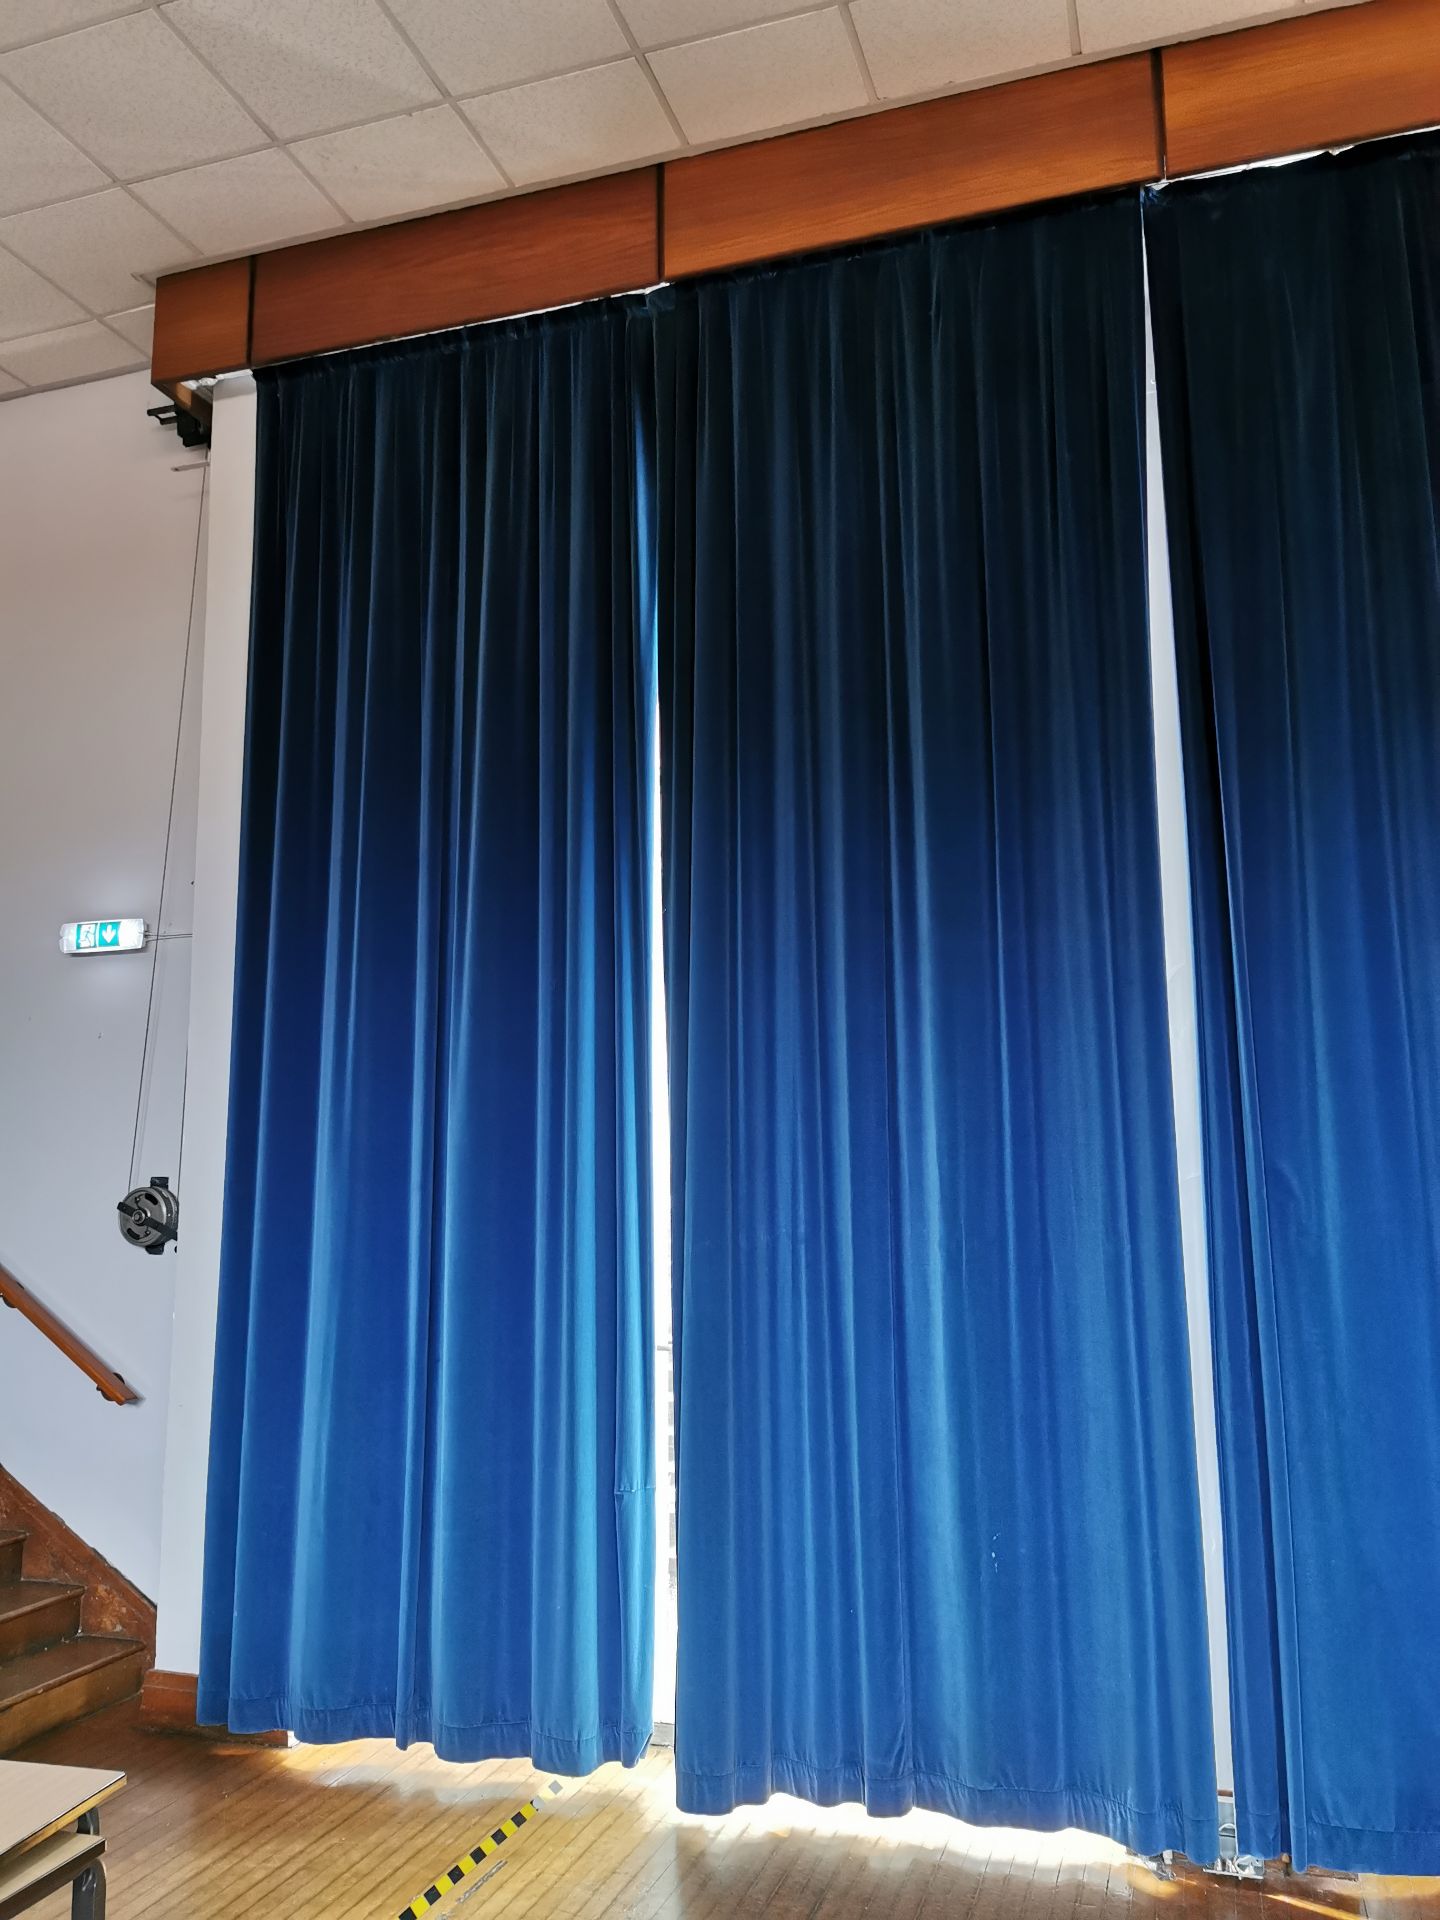 Tall curtains aprox 15ft x 7ft Navy blue